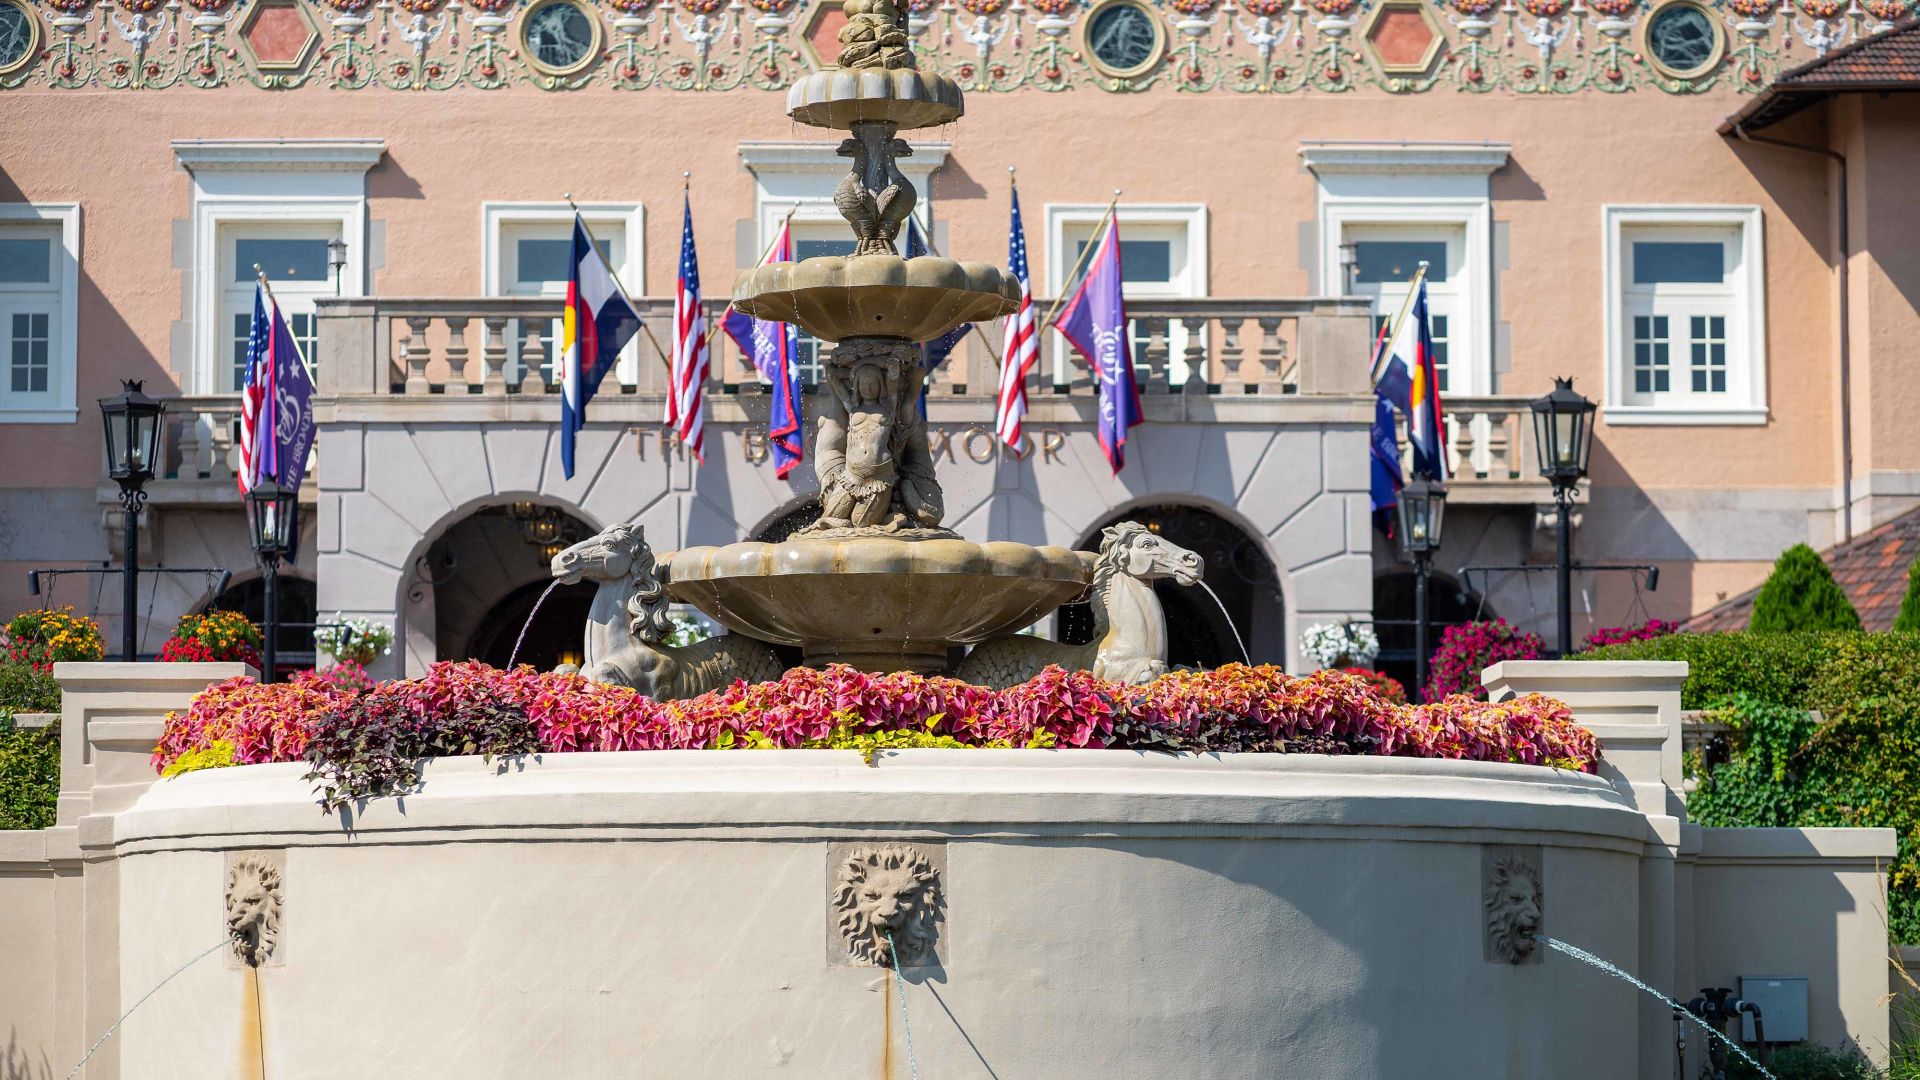 A Fountain With Flowers In Front Of A Building